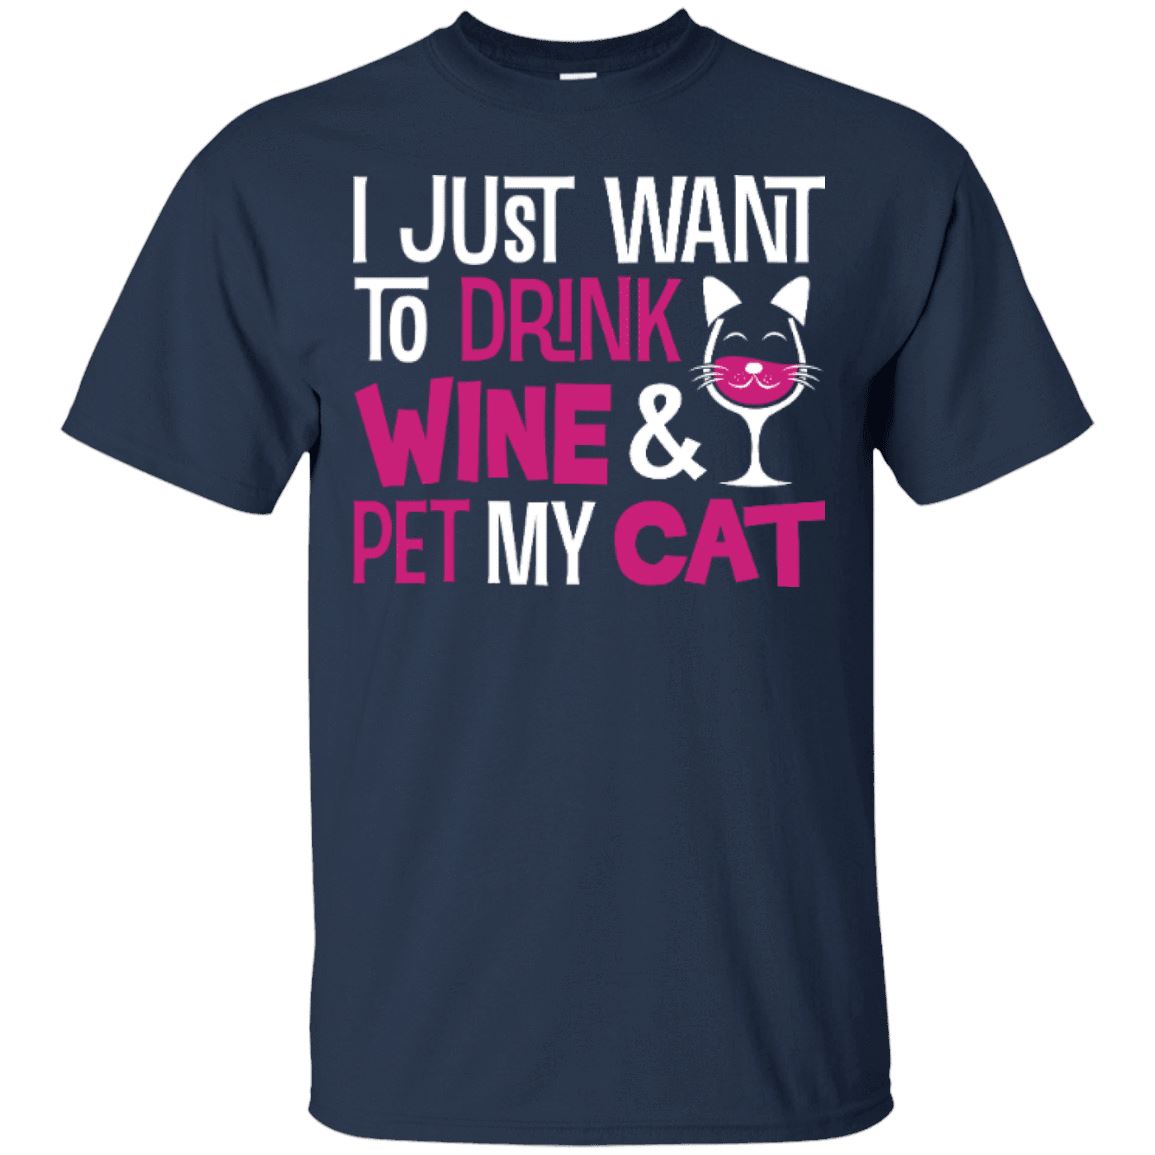 Cat Tee - I Just Want To Drink Wine & Pet My Cat - CatsForLife